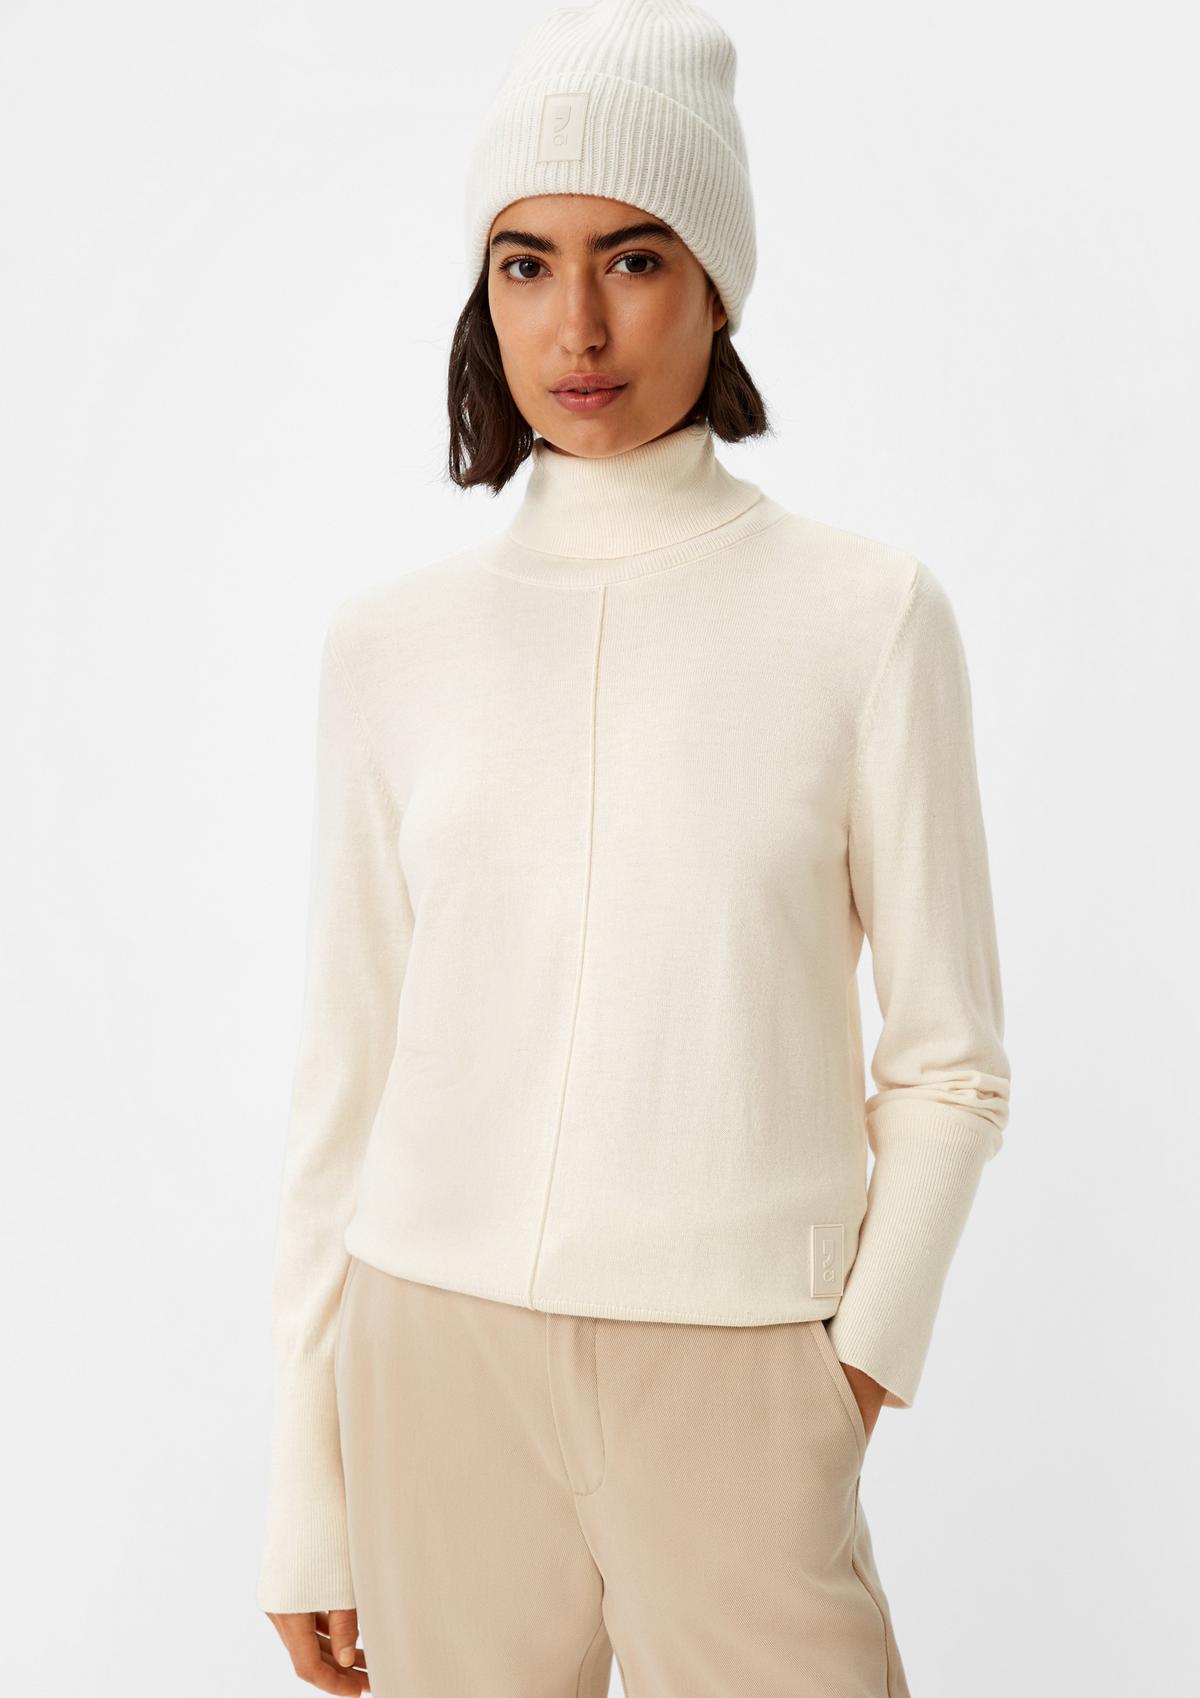 Fine knit jumper made of a wool blend with cashmere and viscose